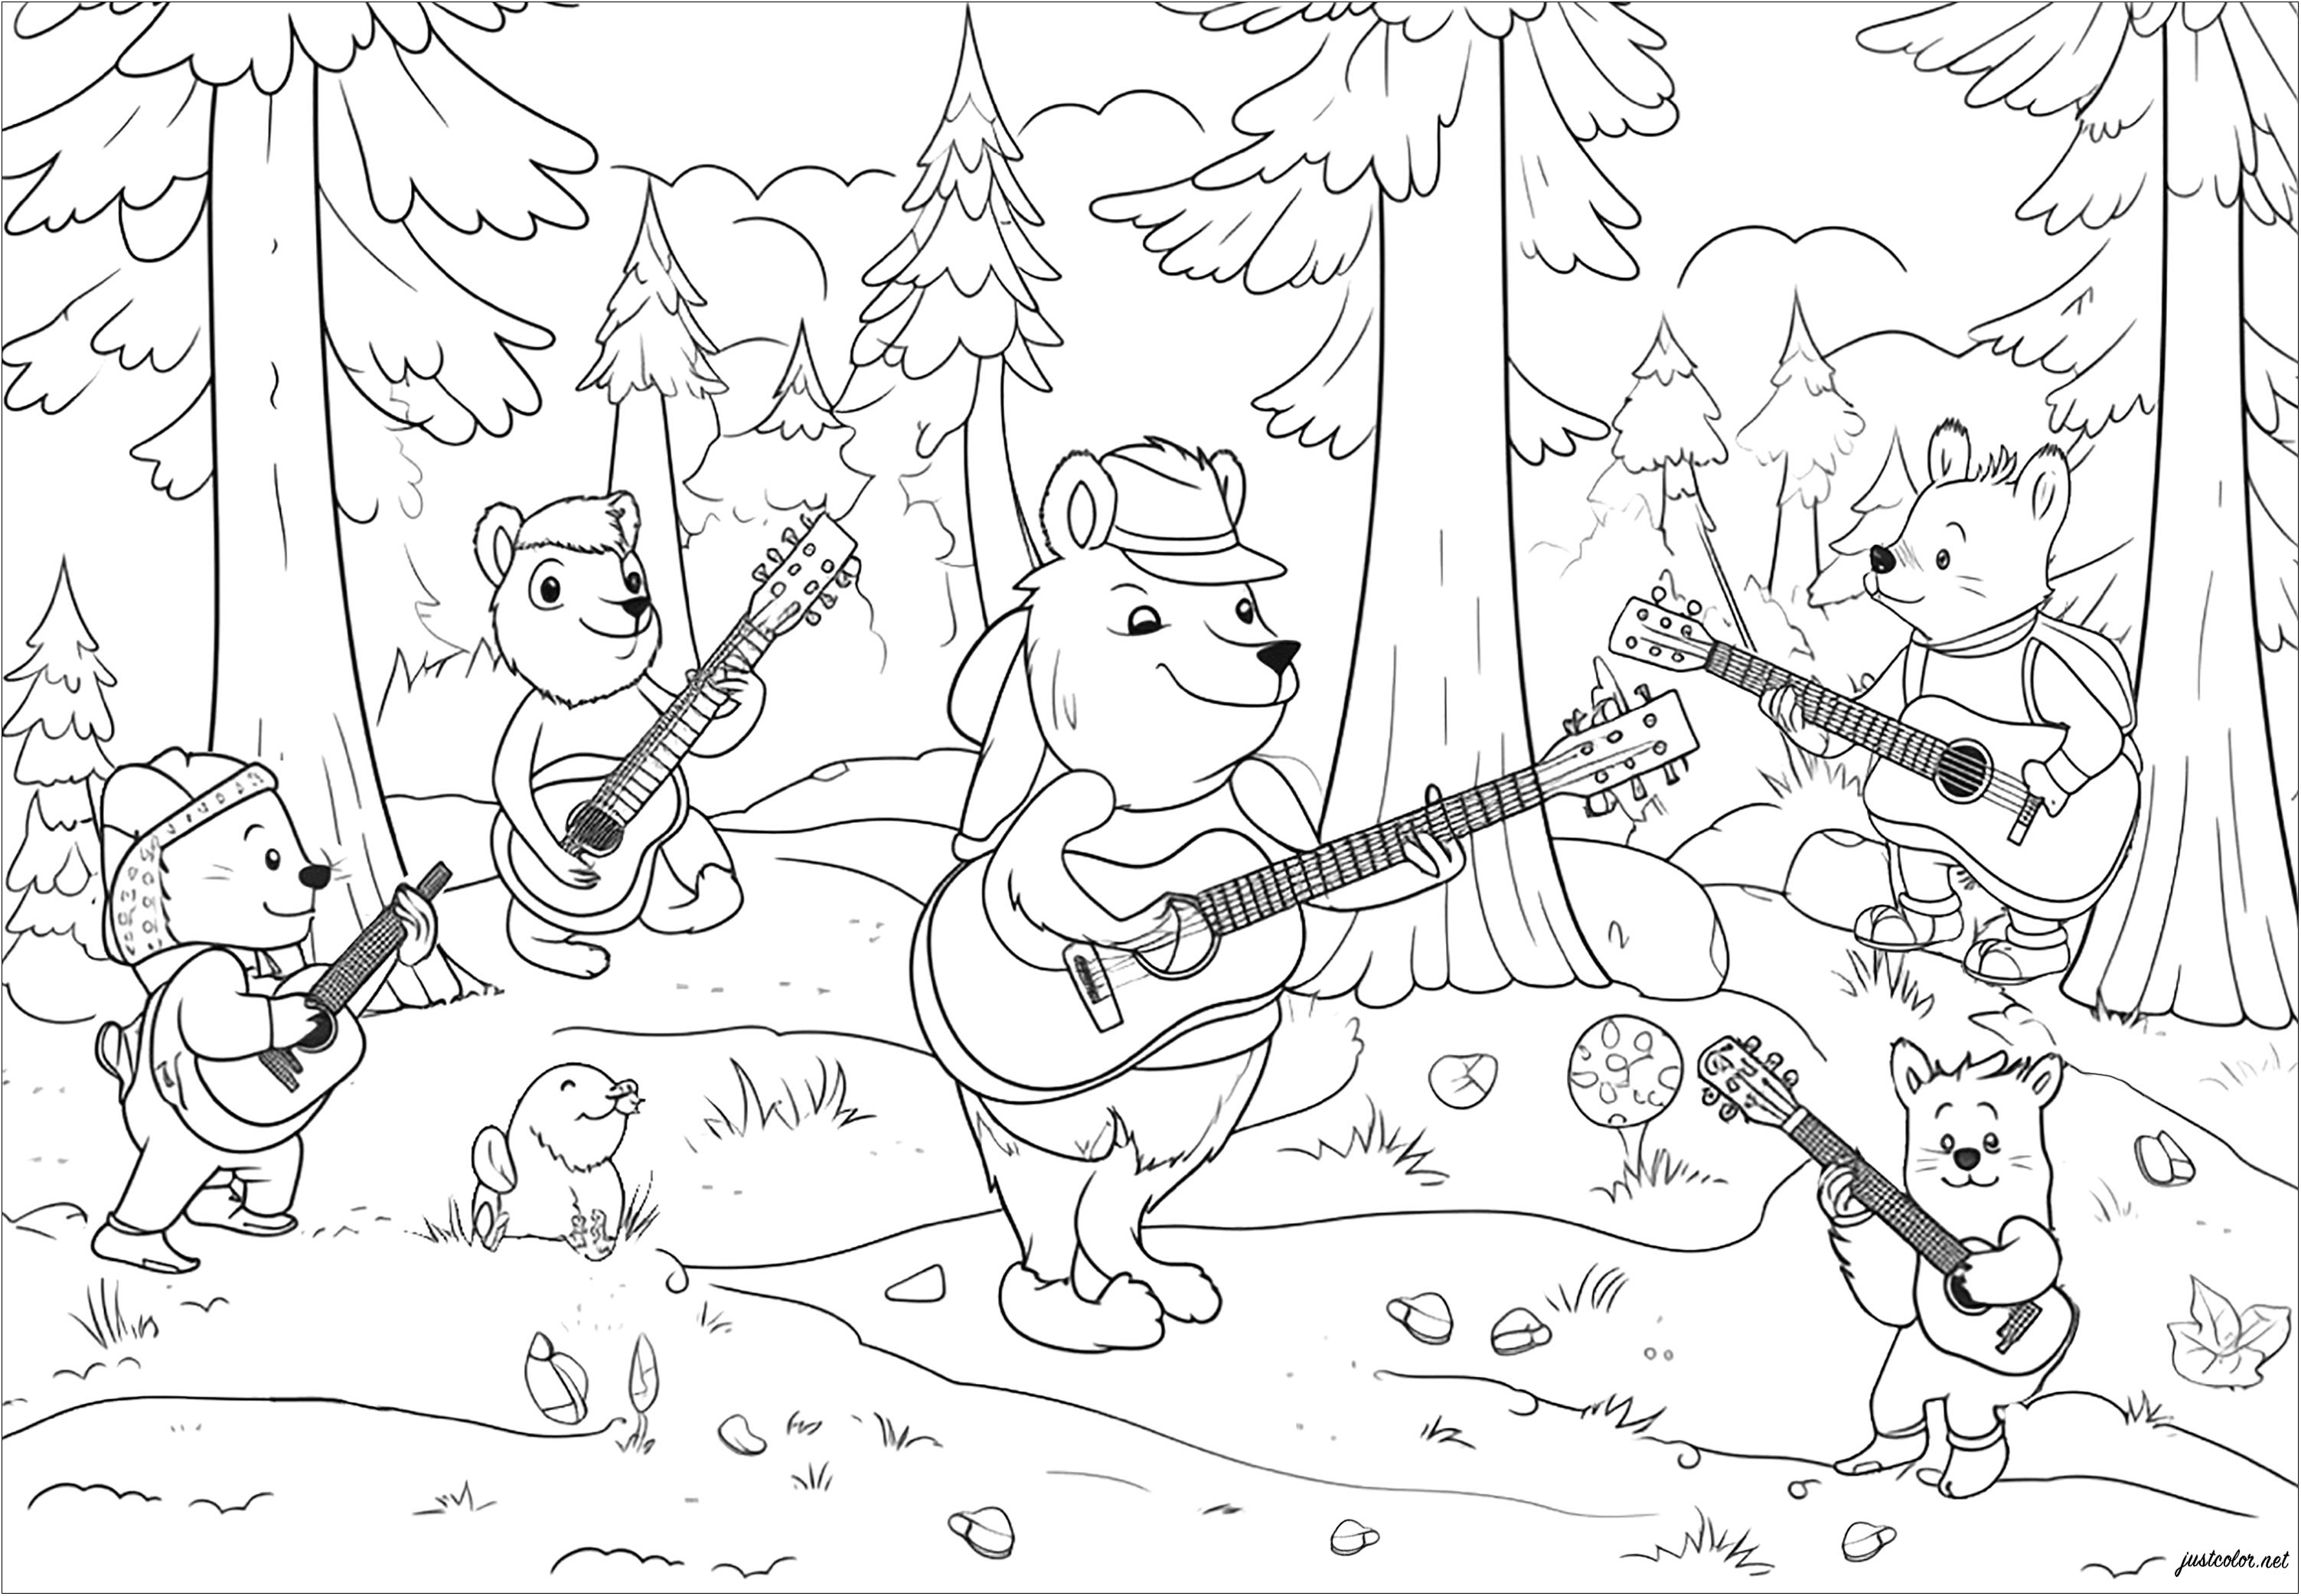 A childish but detailed coloring page with bears singing in a pretty forest. This coloring is a real invitation to imagination and creativity. It also makes you want to open up to nature and to respect the fauna and flora.